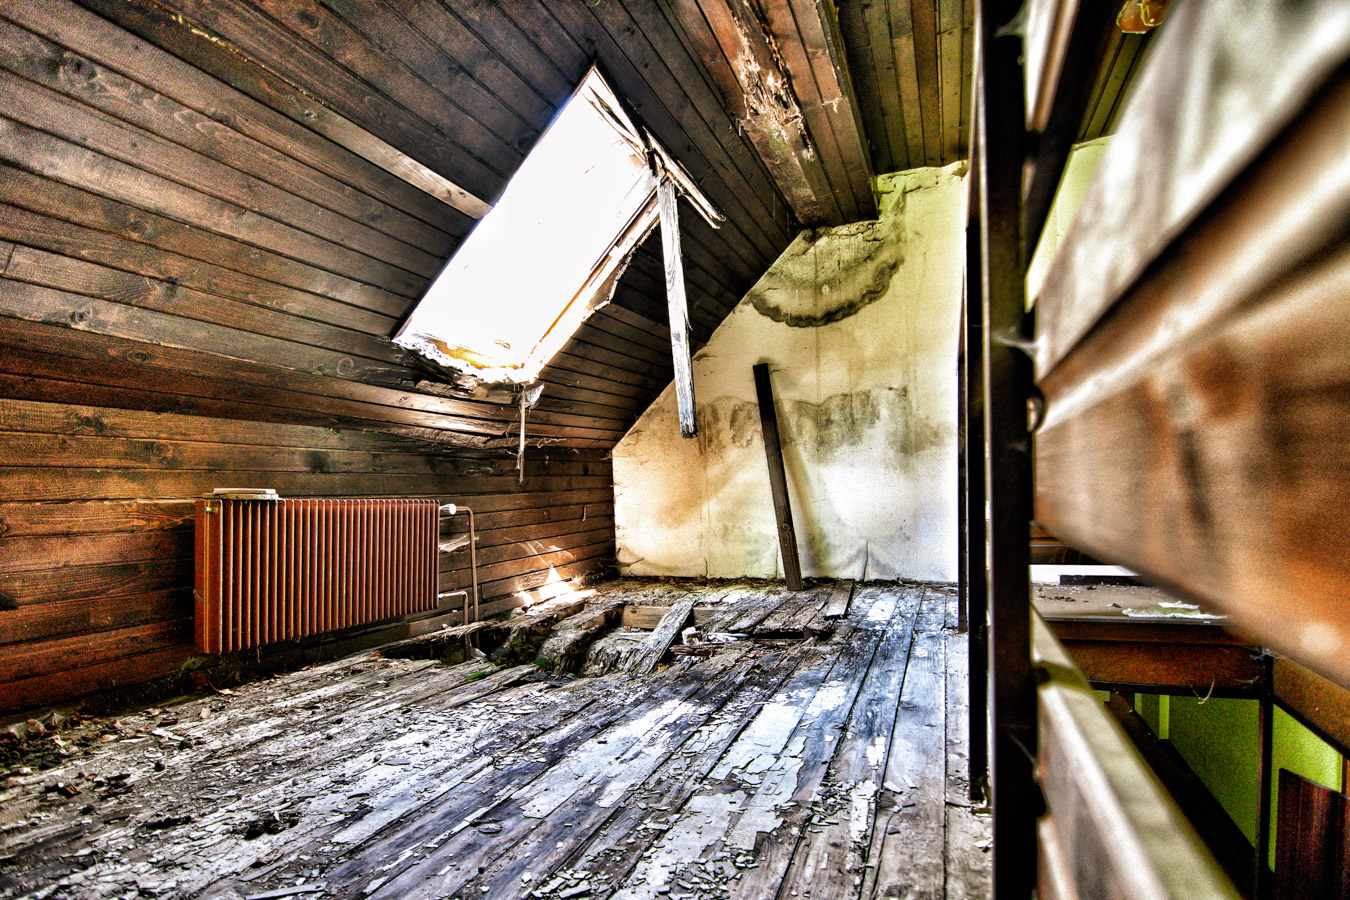 thrill of danger in urbex photography